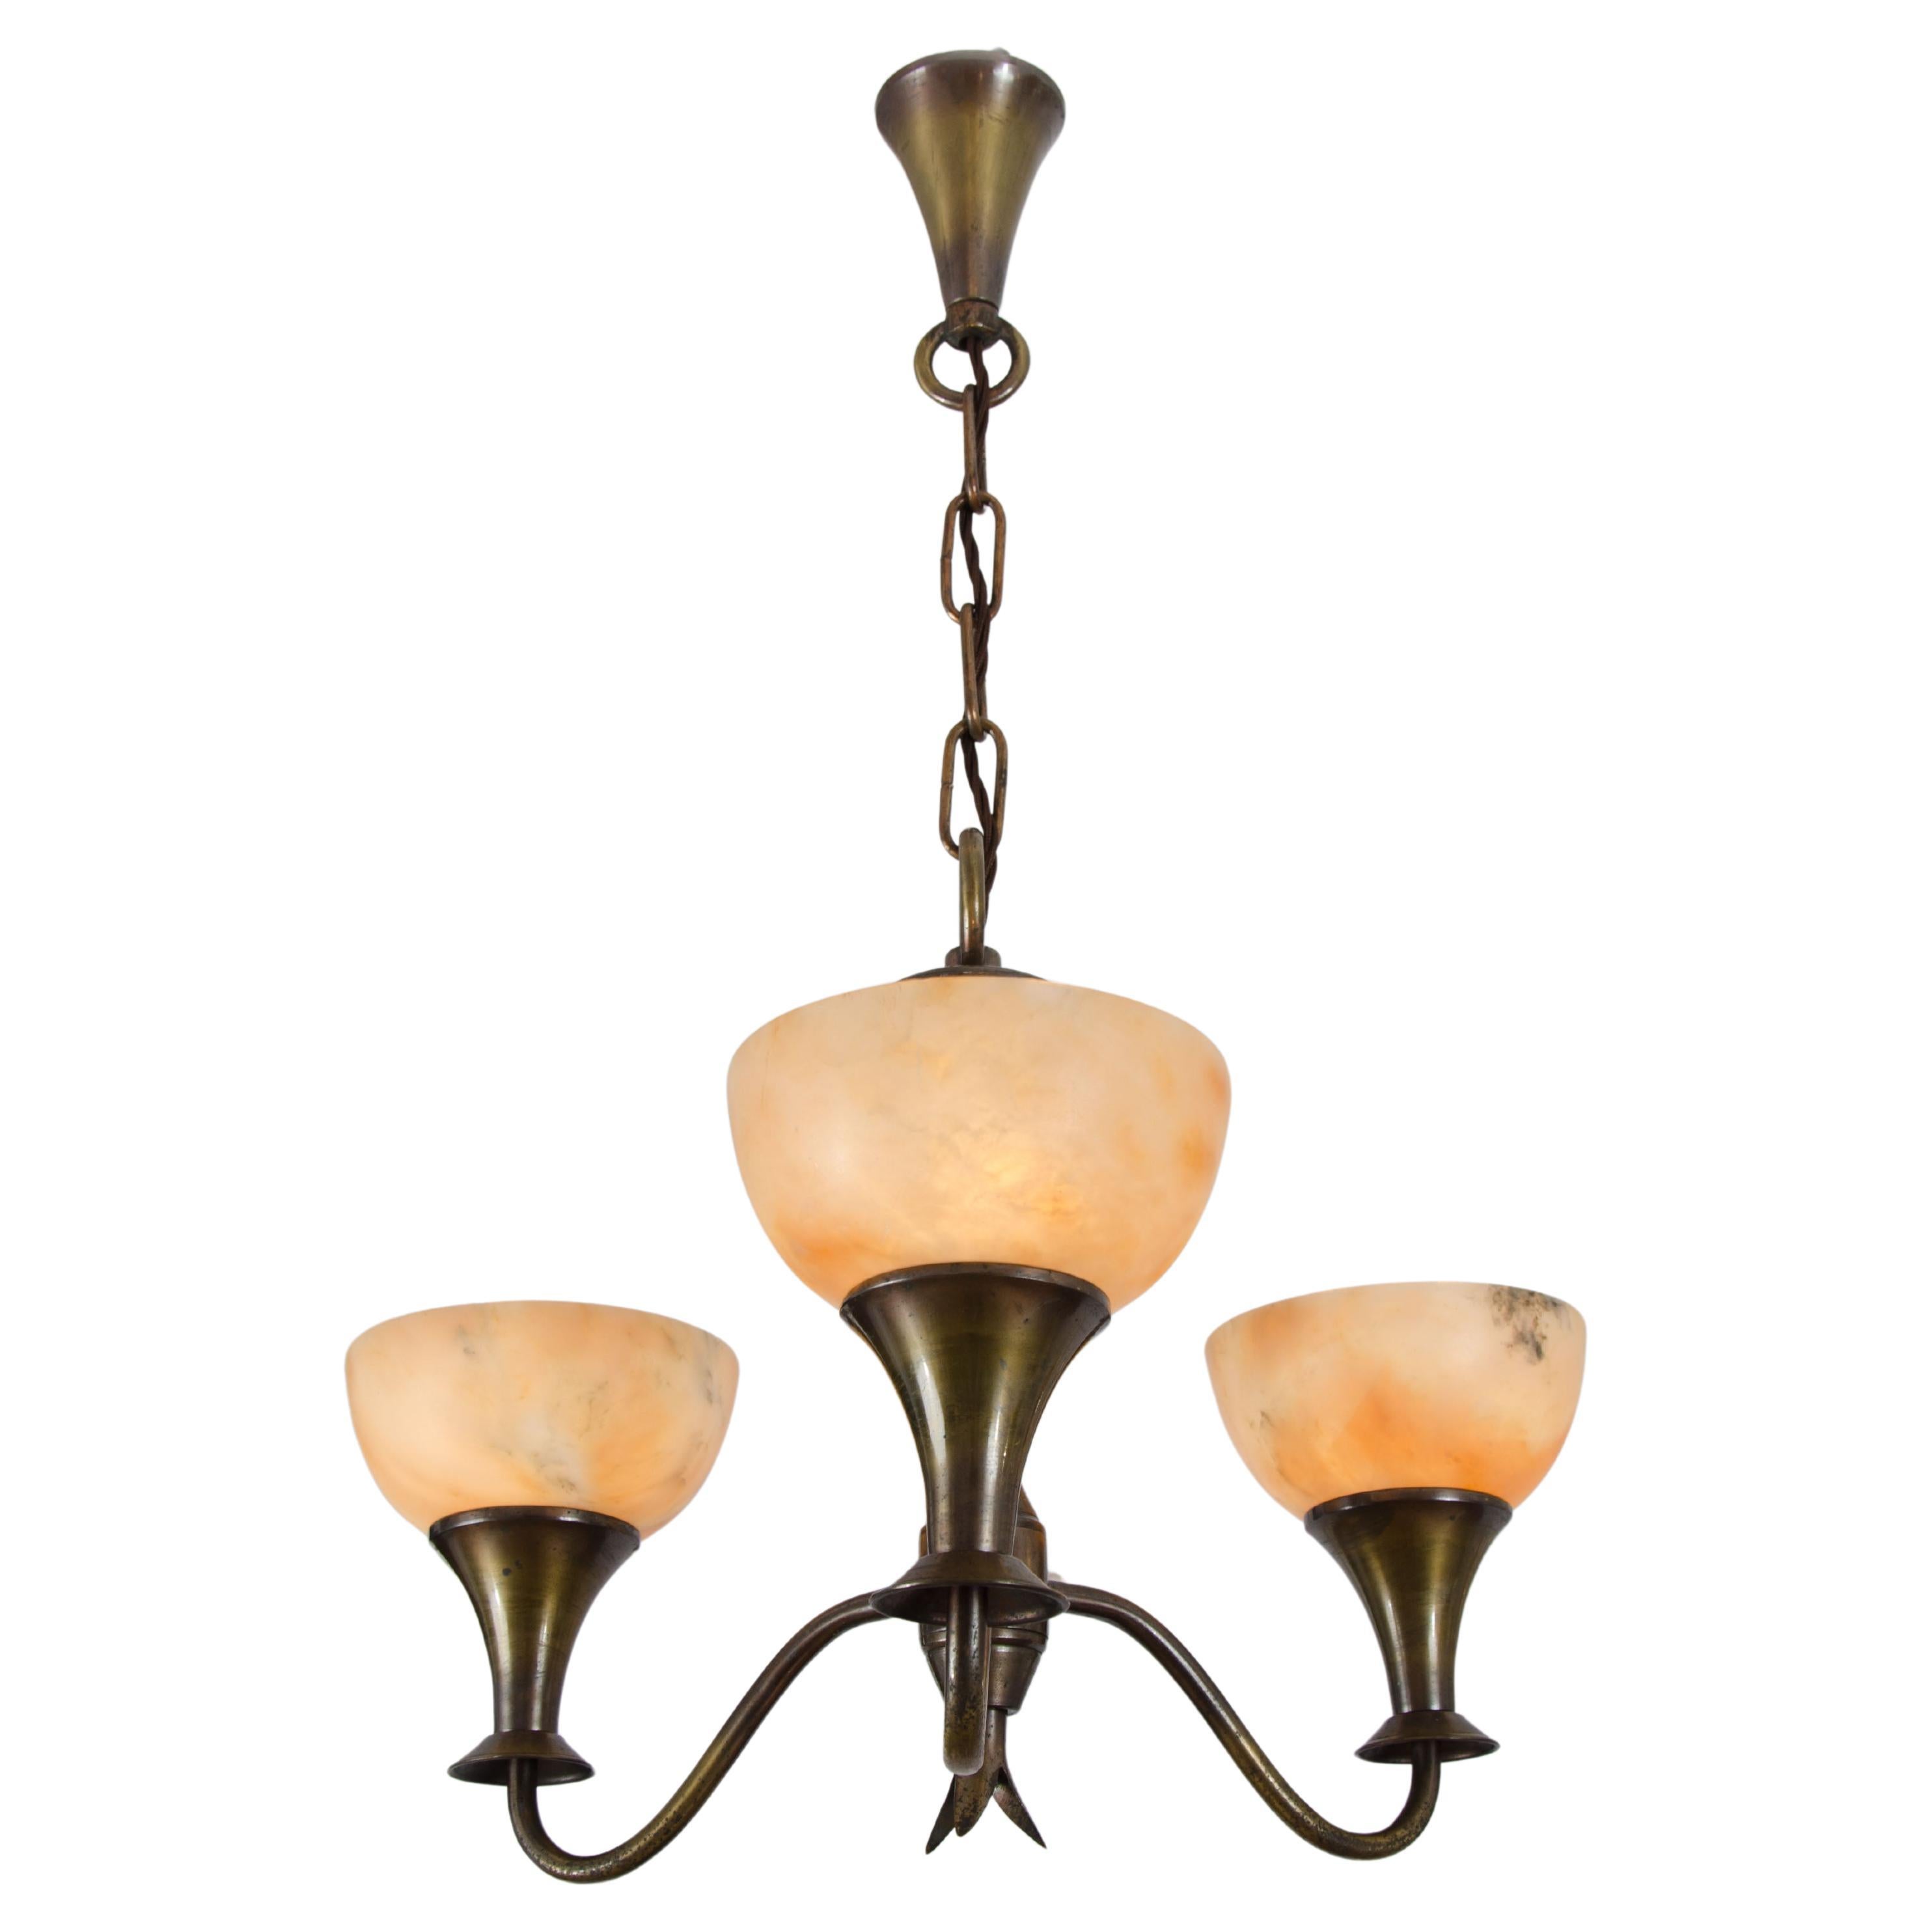 Modernist Art Deco  three arm chandelier with alabaster up lighter shades. Brass metal frame is patinated in bronze. Chandelier is classical in form and shape made in the 1930's in France. Ideal for a hall way or small room.